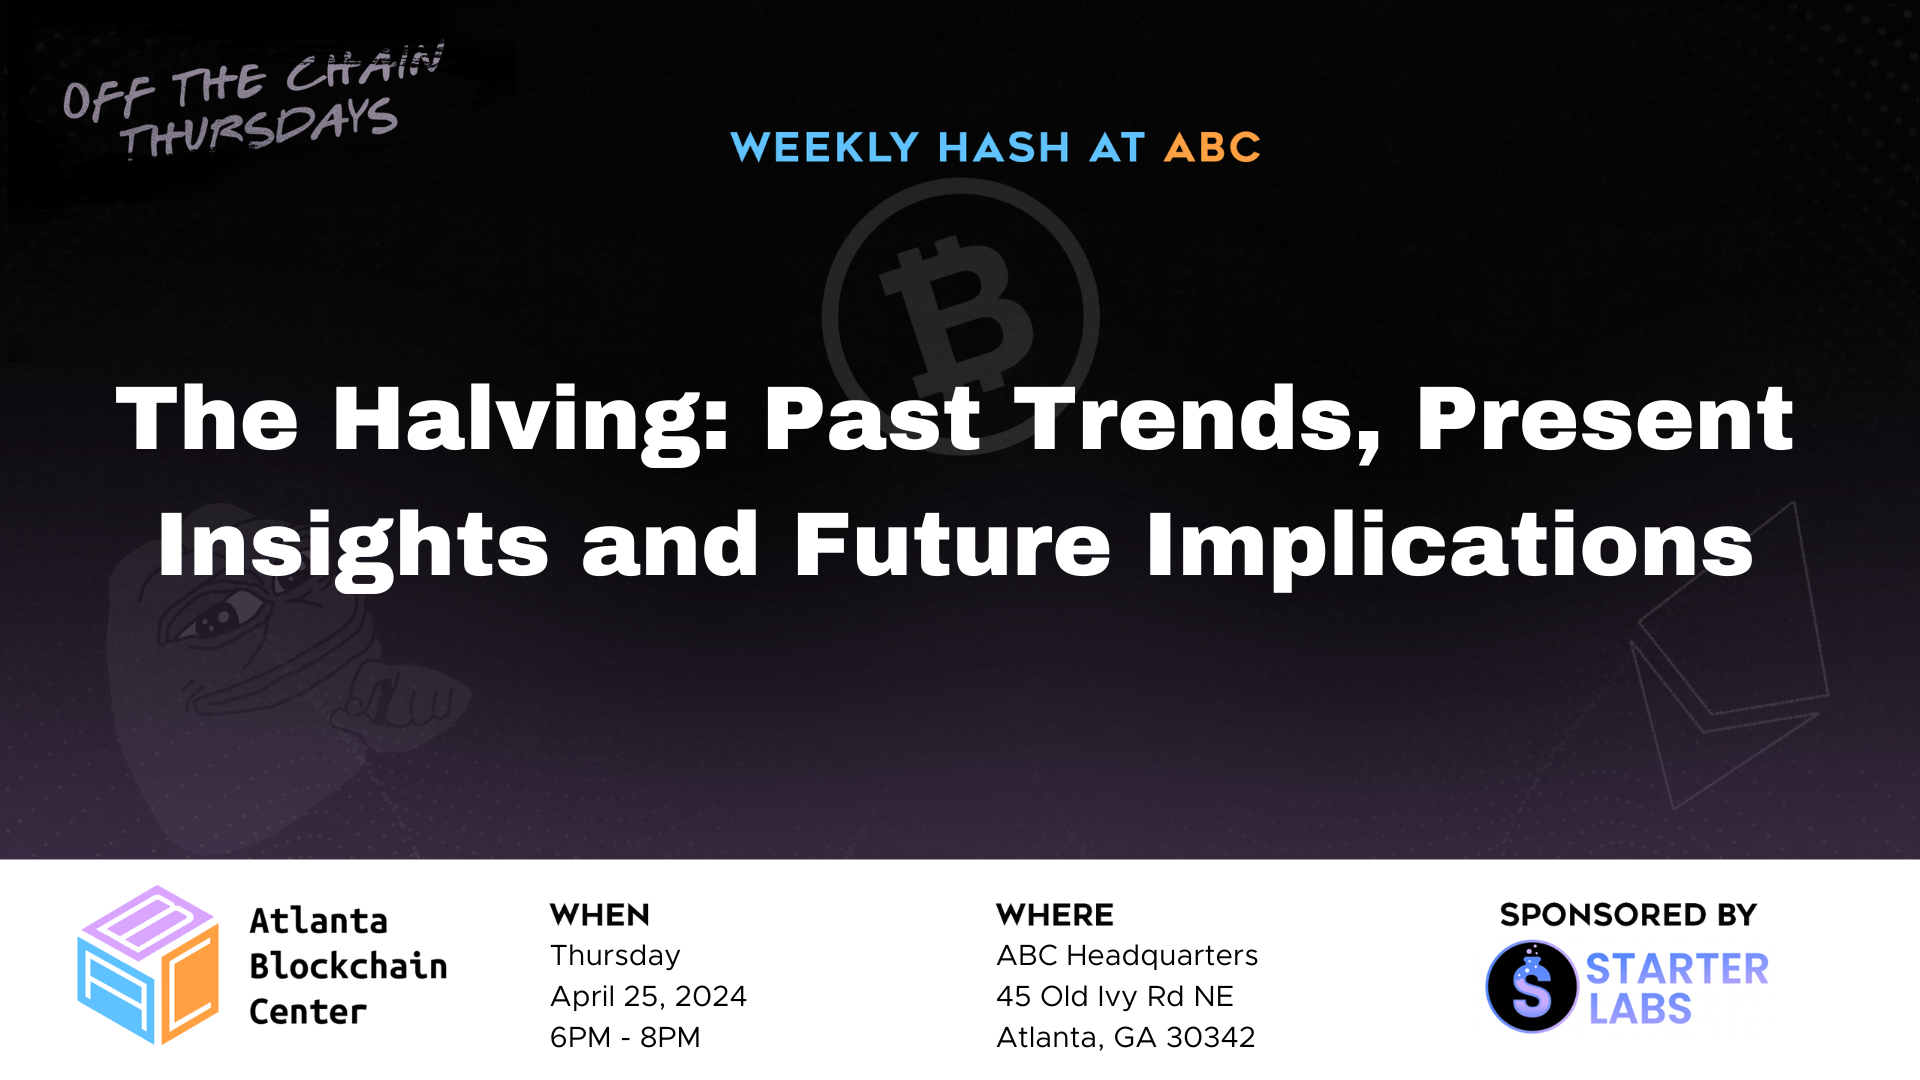 The Halving: Past Trends, Present Insights and Future Implications